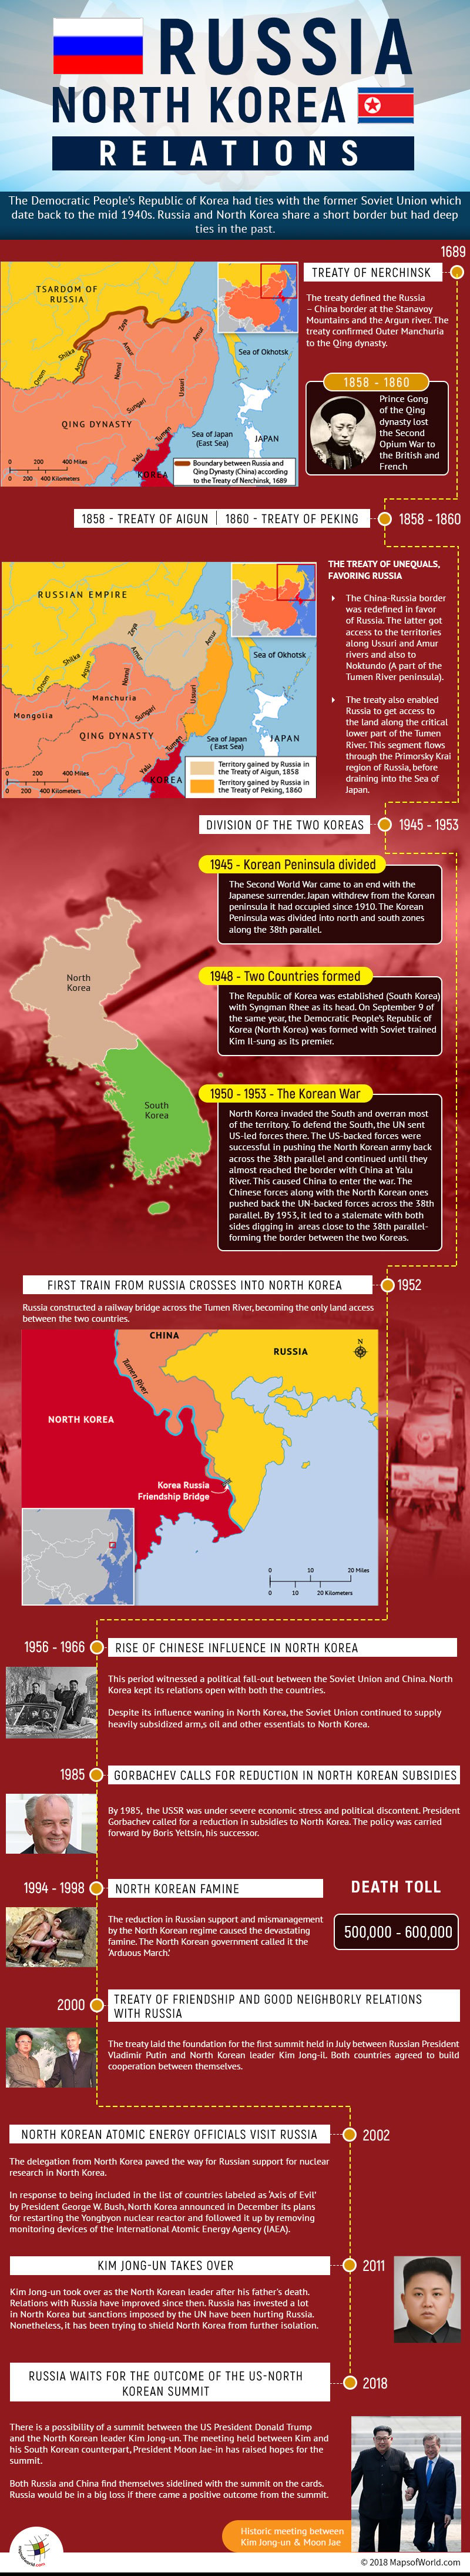 Infographic describing Russia and North Korea Relations